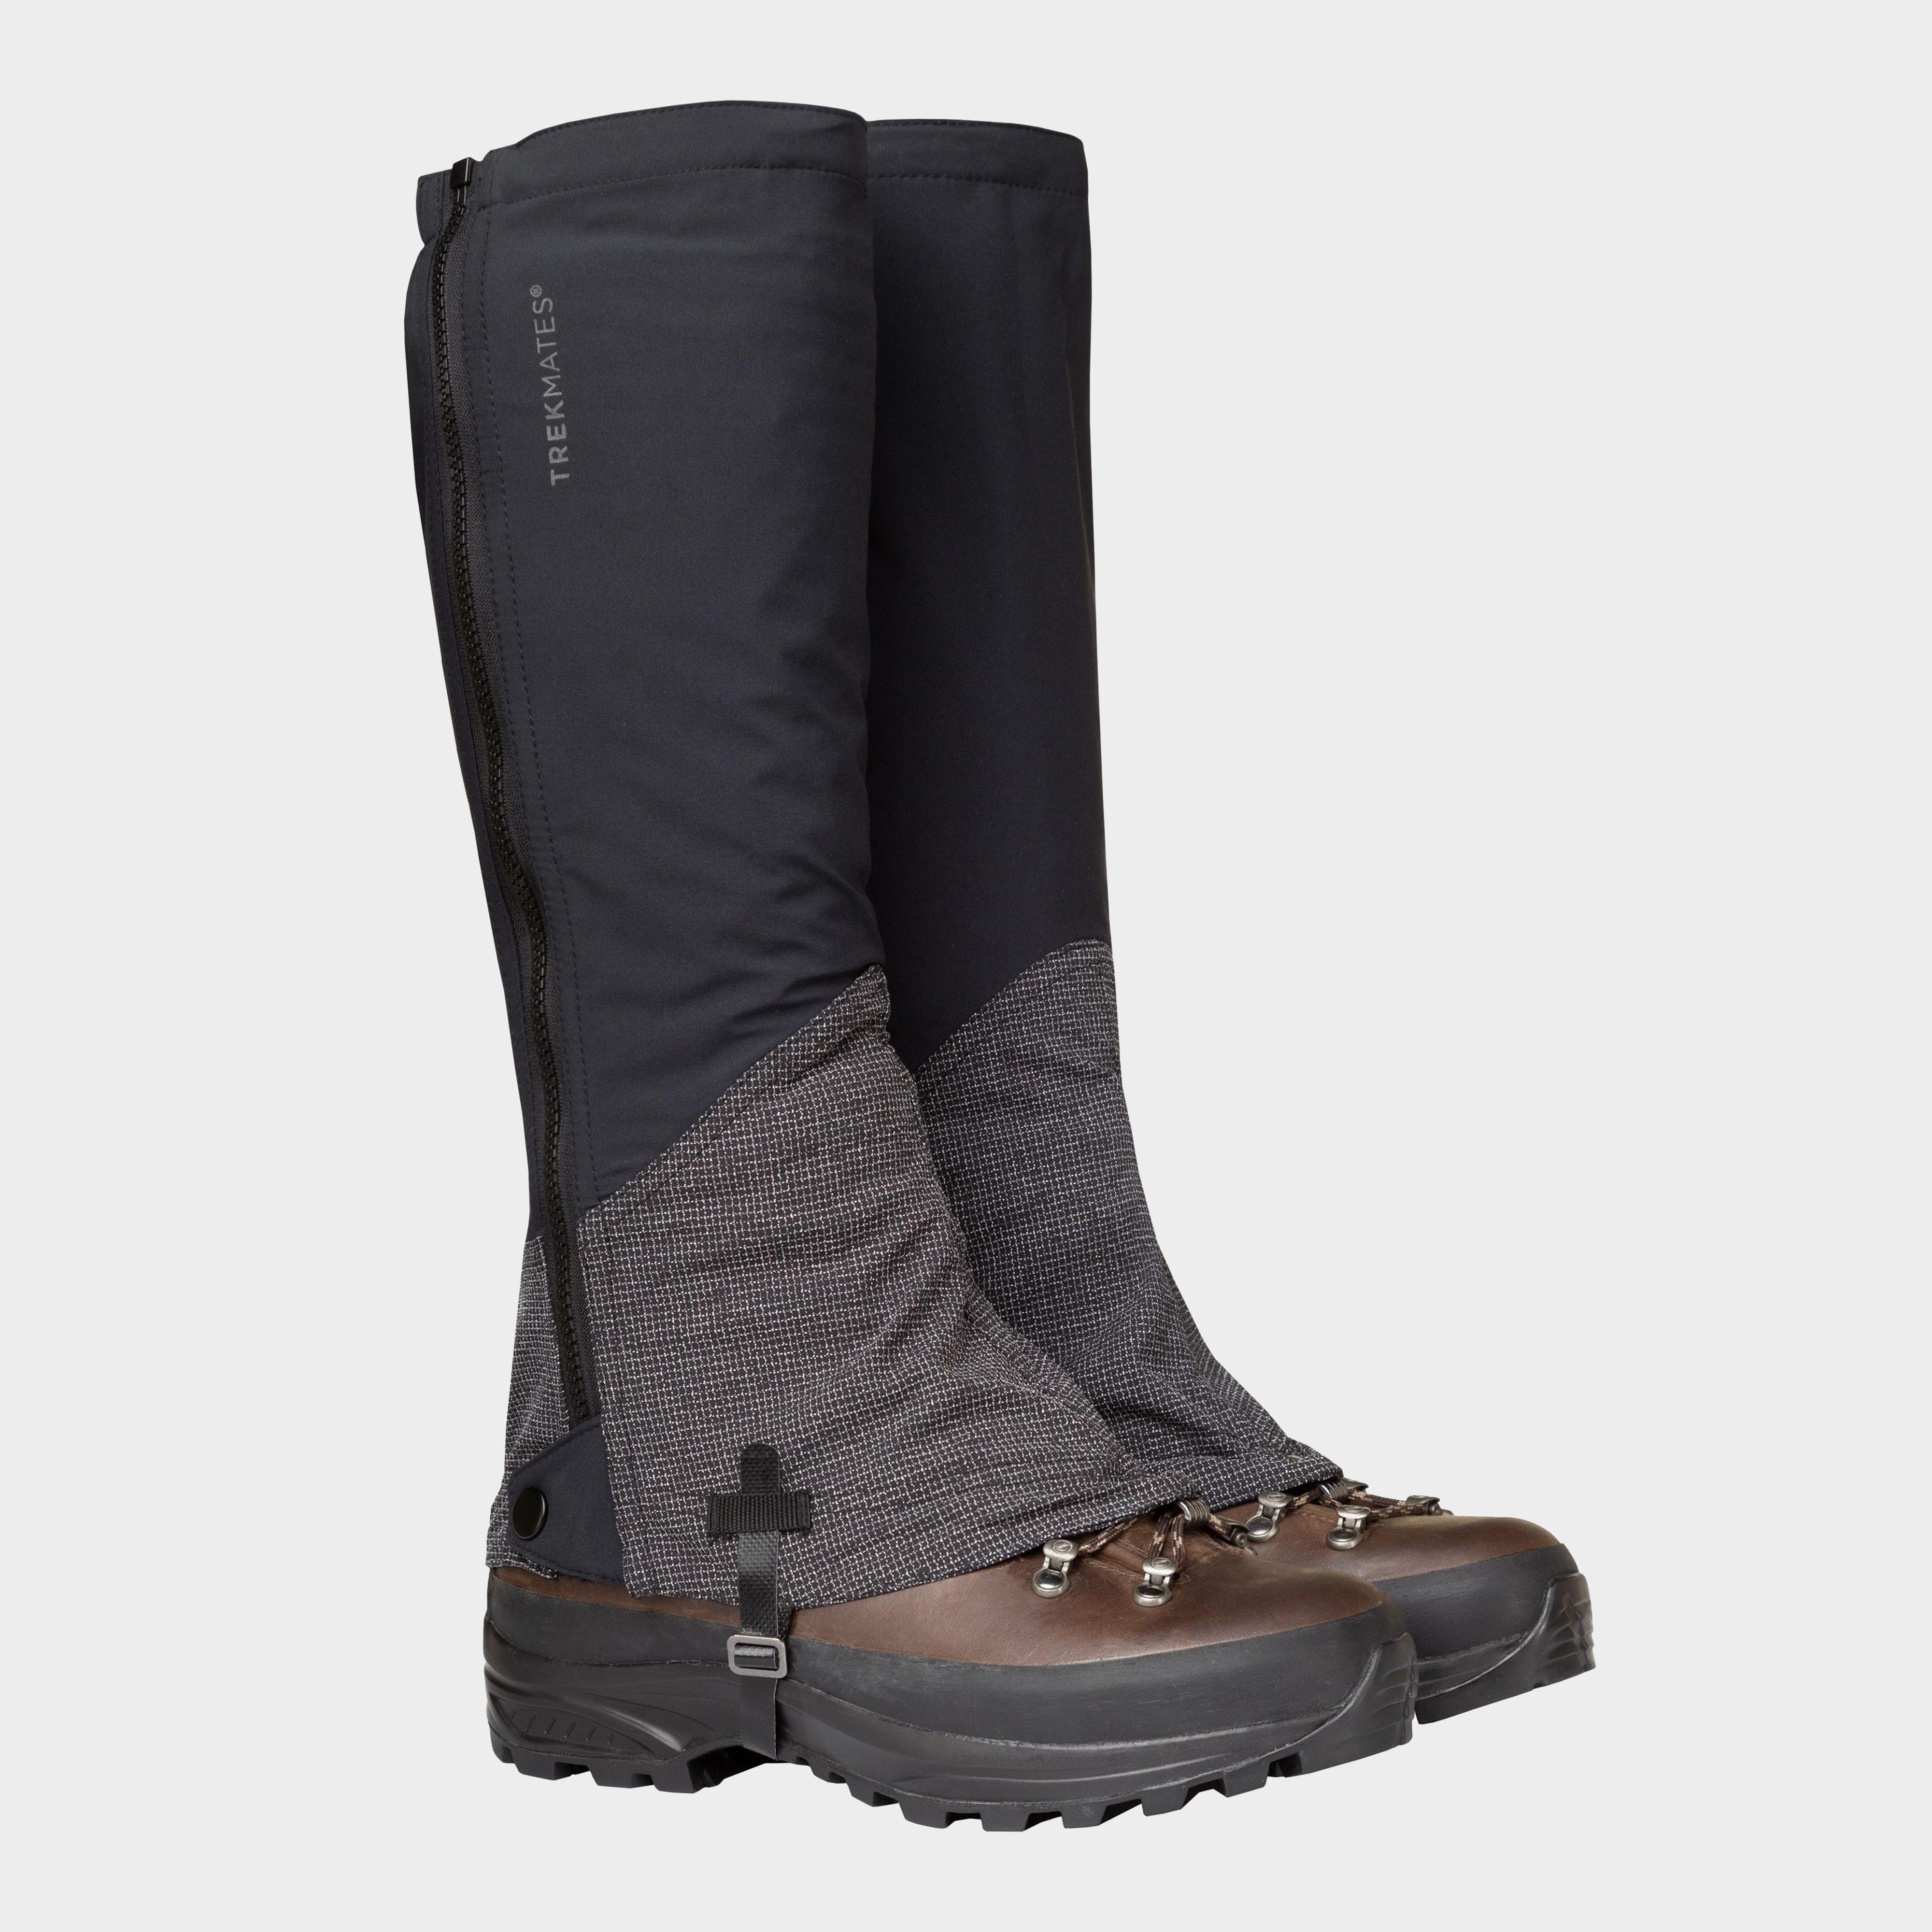  Trekmates Orchy Dry Gaiter